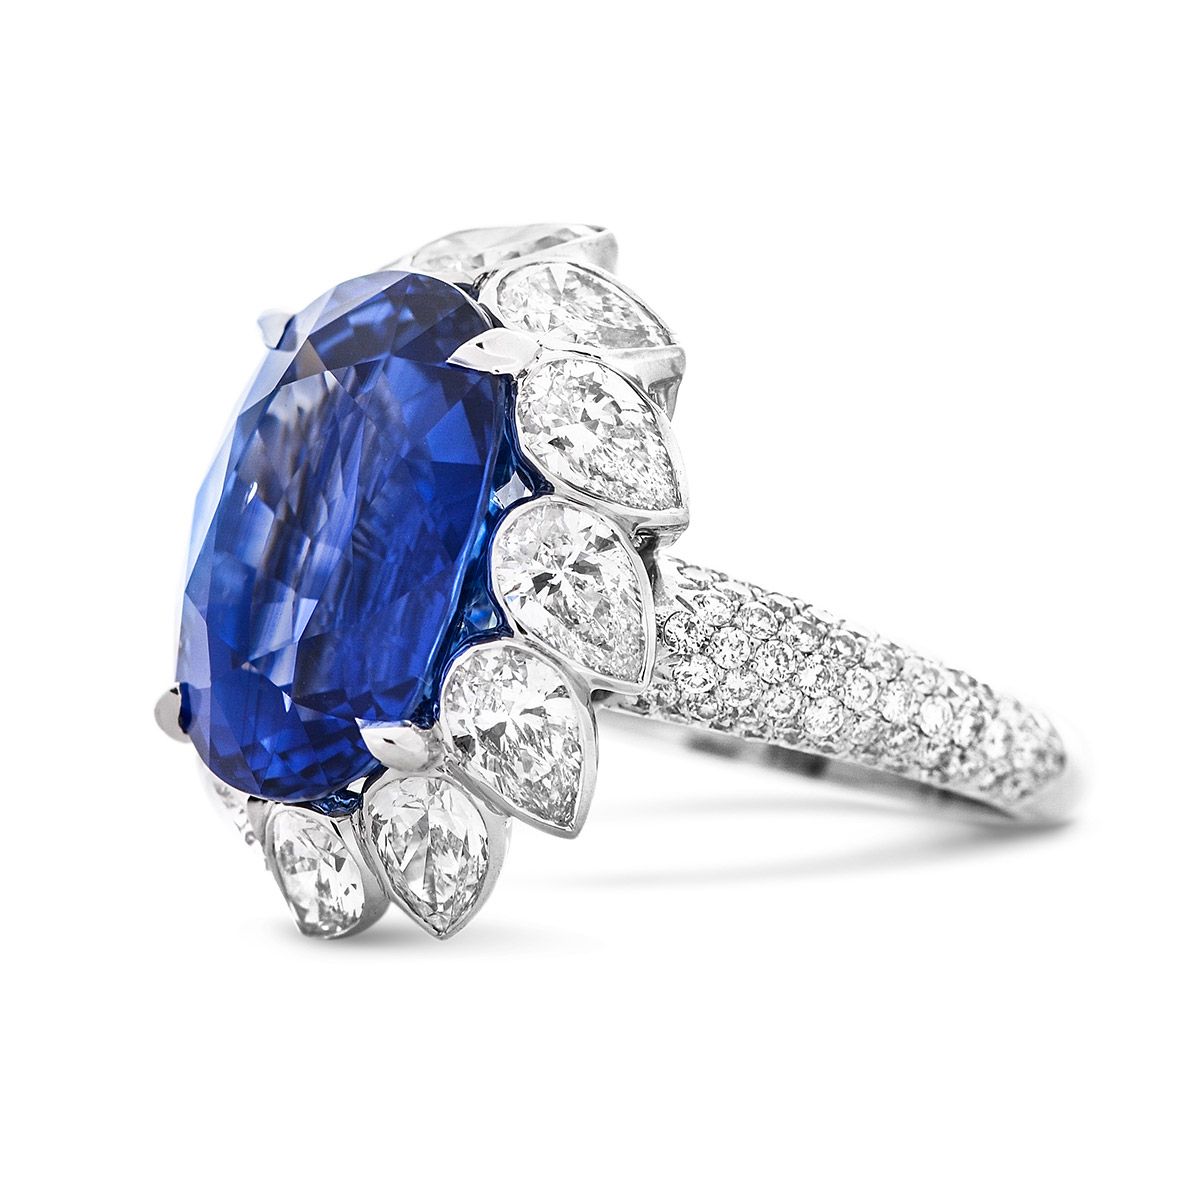 Natural Blue Sri-Lanka Sapphire Ring, 12.94 Ct. (16.64 Ct. TW), GRS Certified, GRS2013-030755T, Unheated